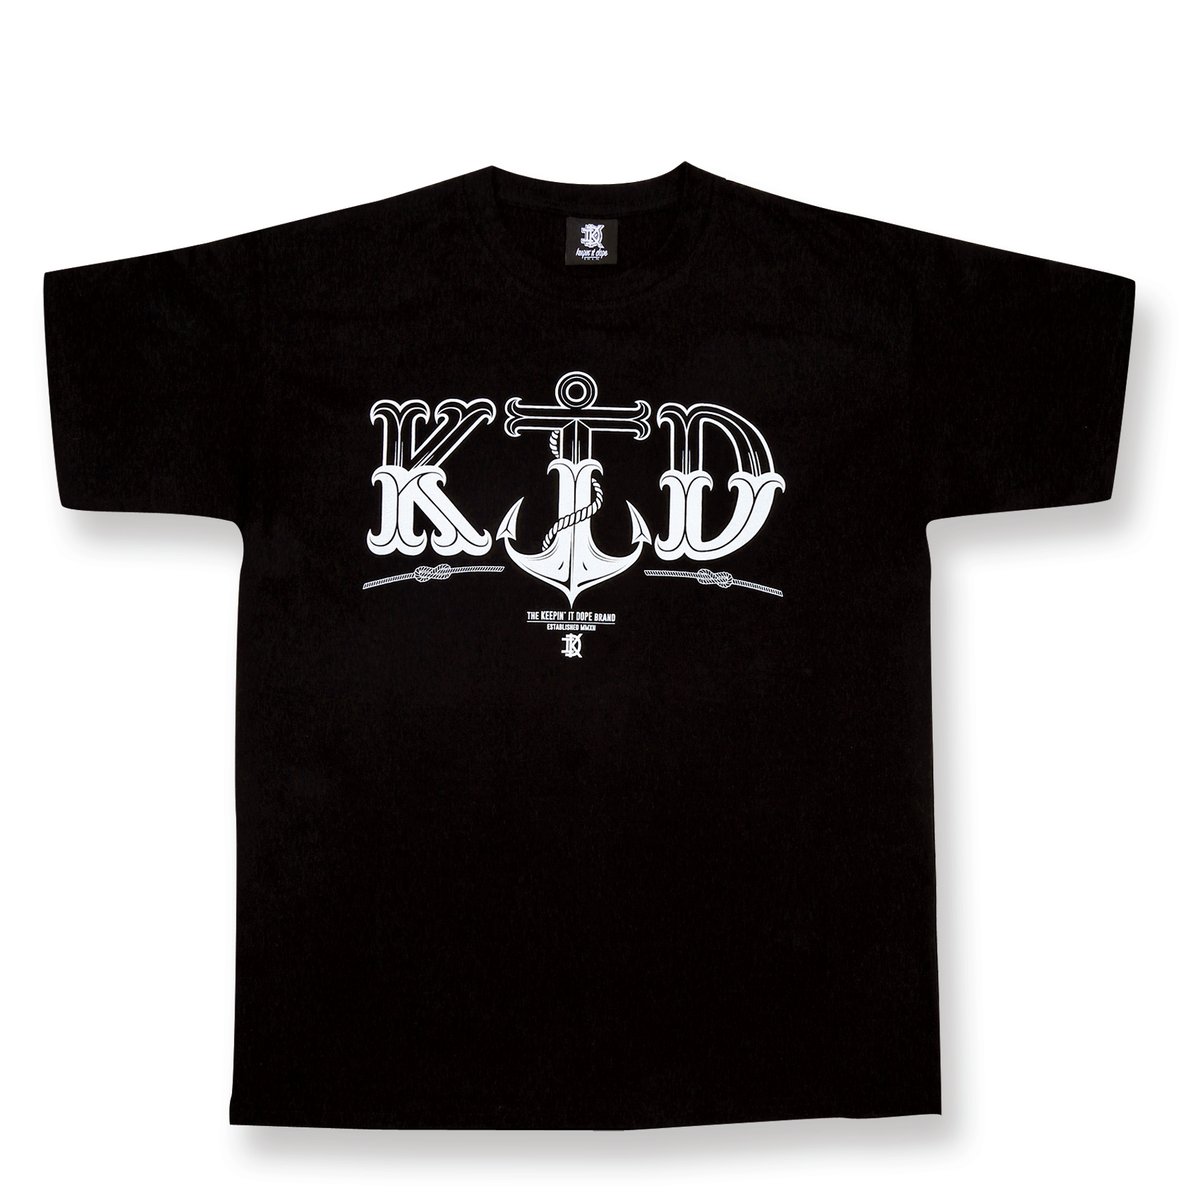 Anchor - Black T-Shirt - 50% OFF! / Keepin' It Dope